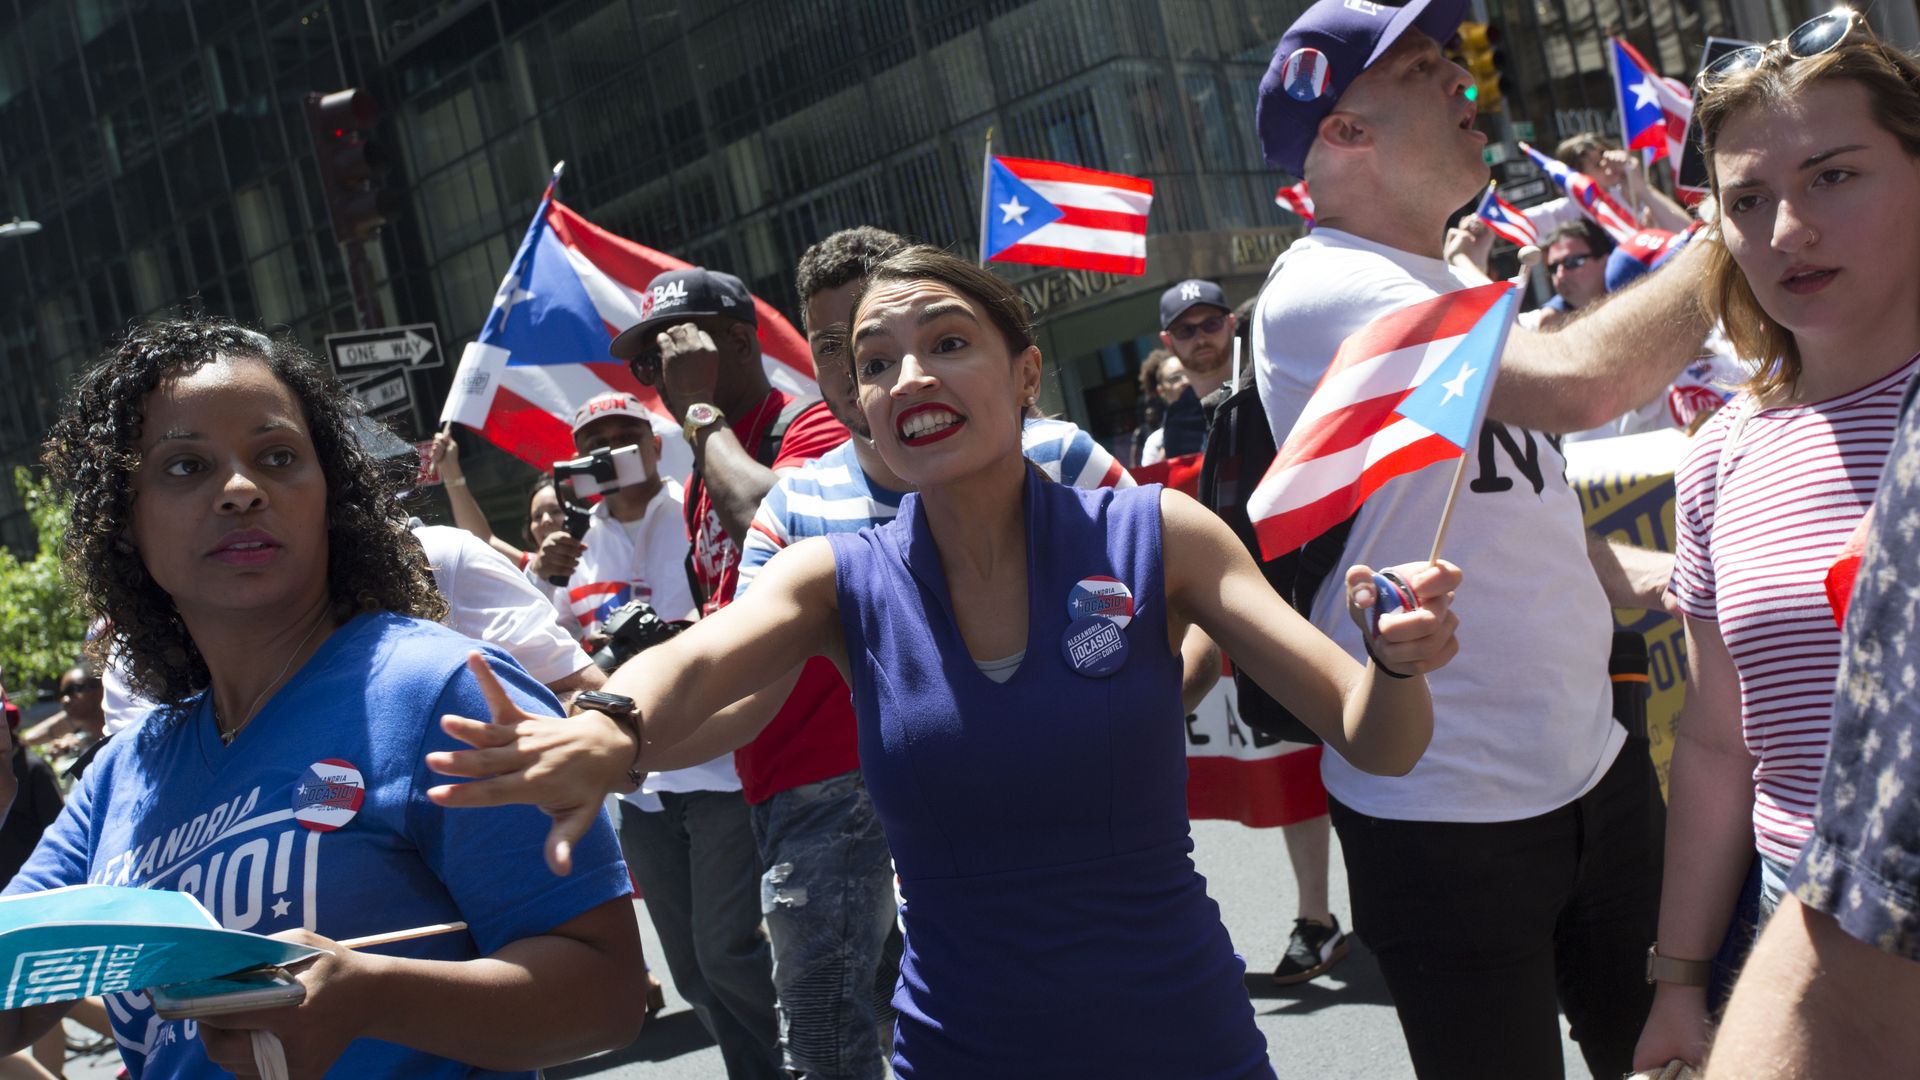 Rep. Alexandria Ocasio-Cortez is seen marching in New York City's 2019 Puerto Rican Day parade.